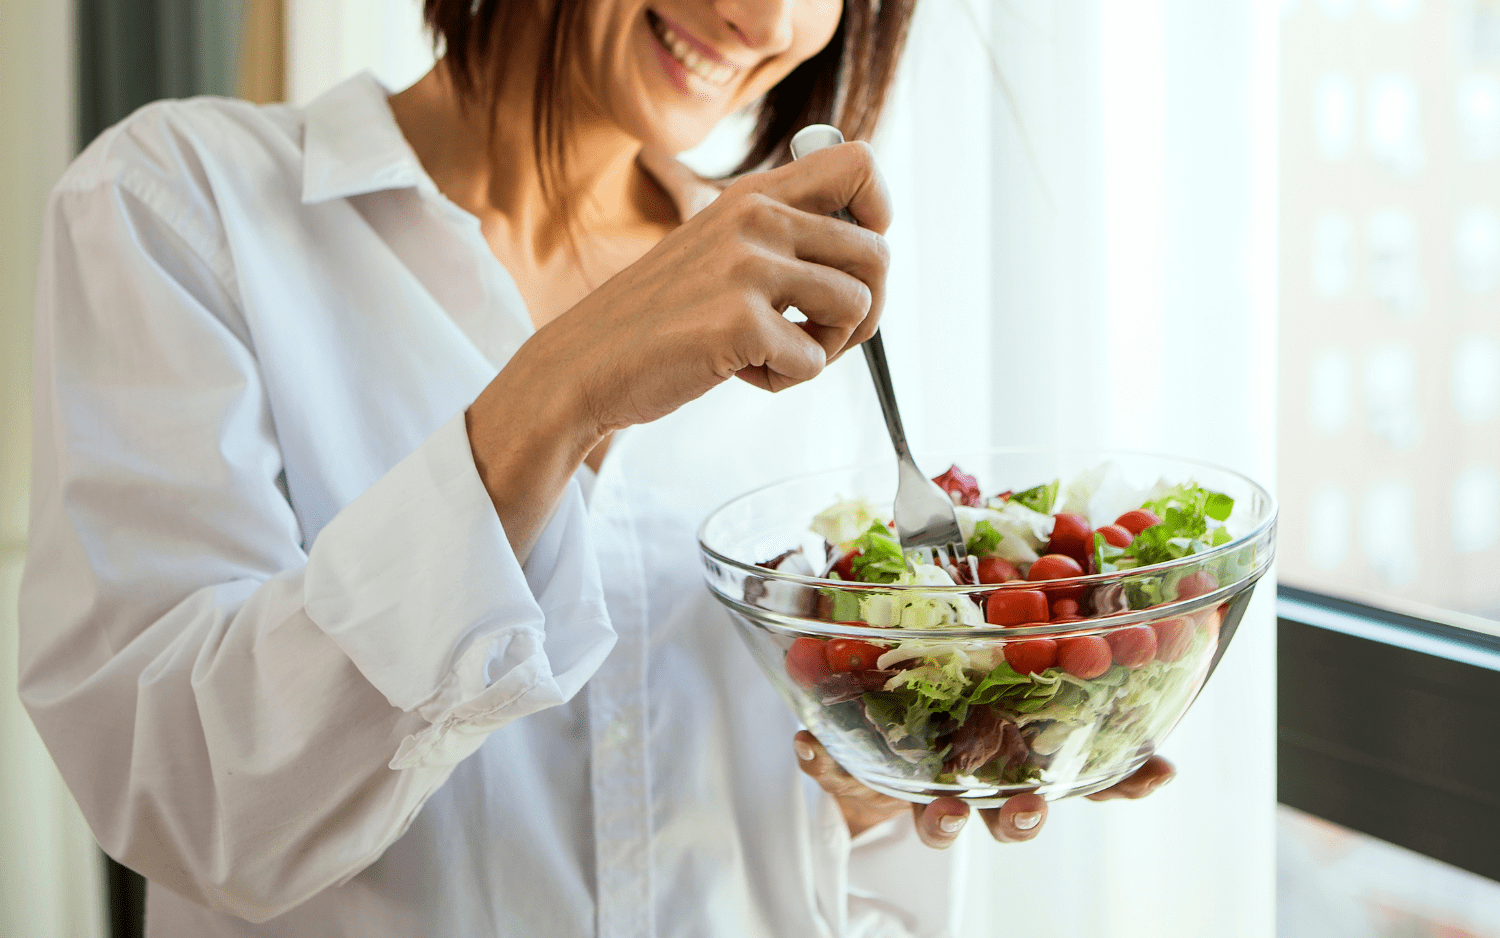 women eating a bowl of salad 